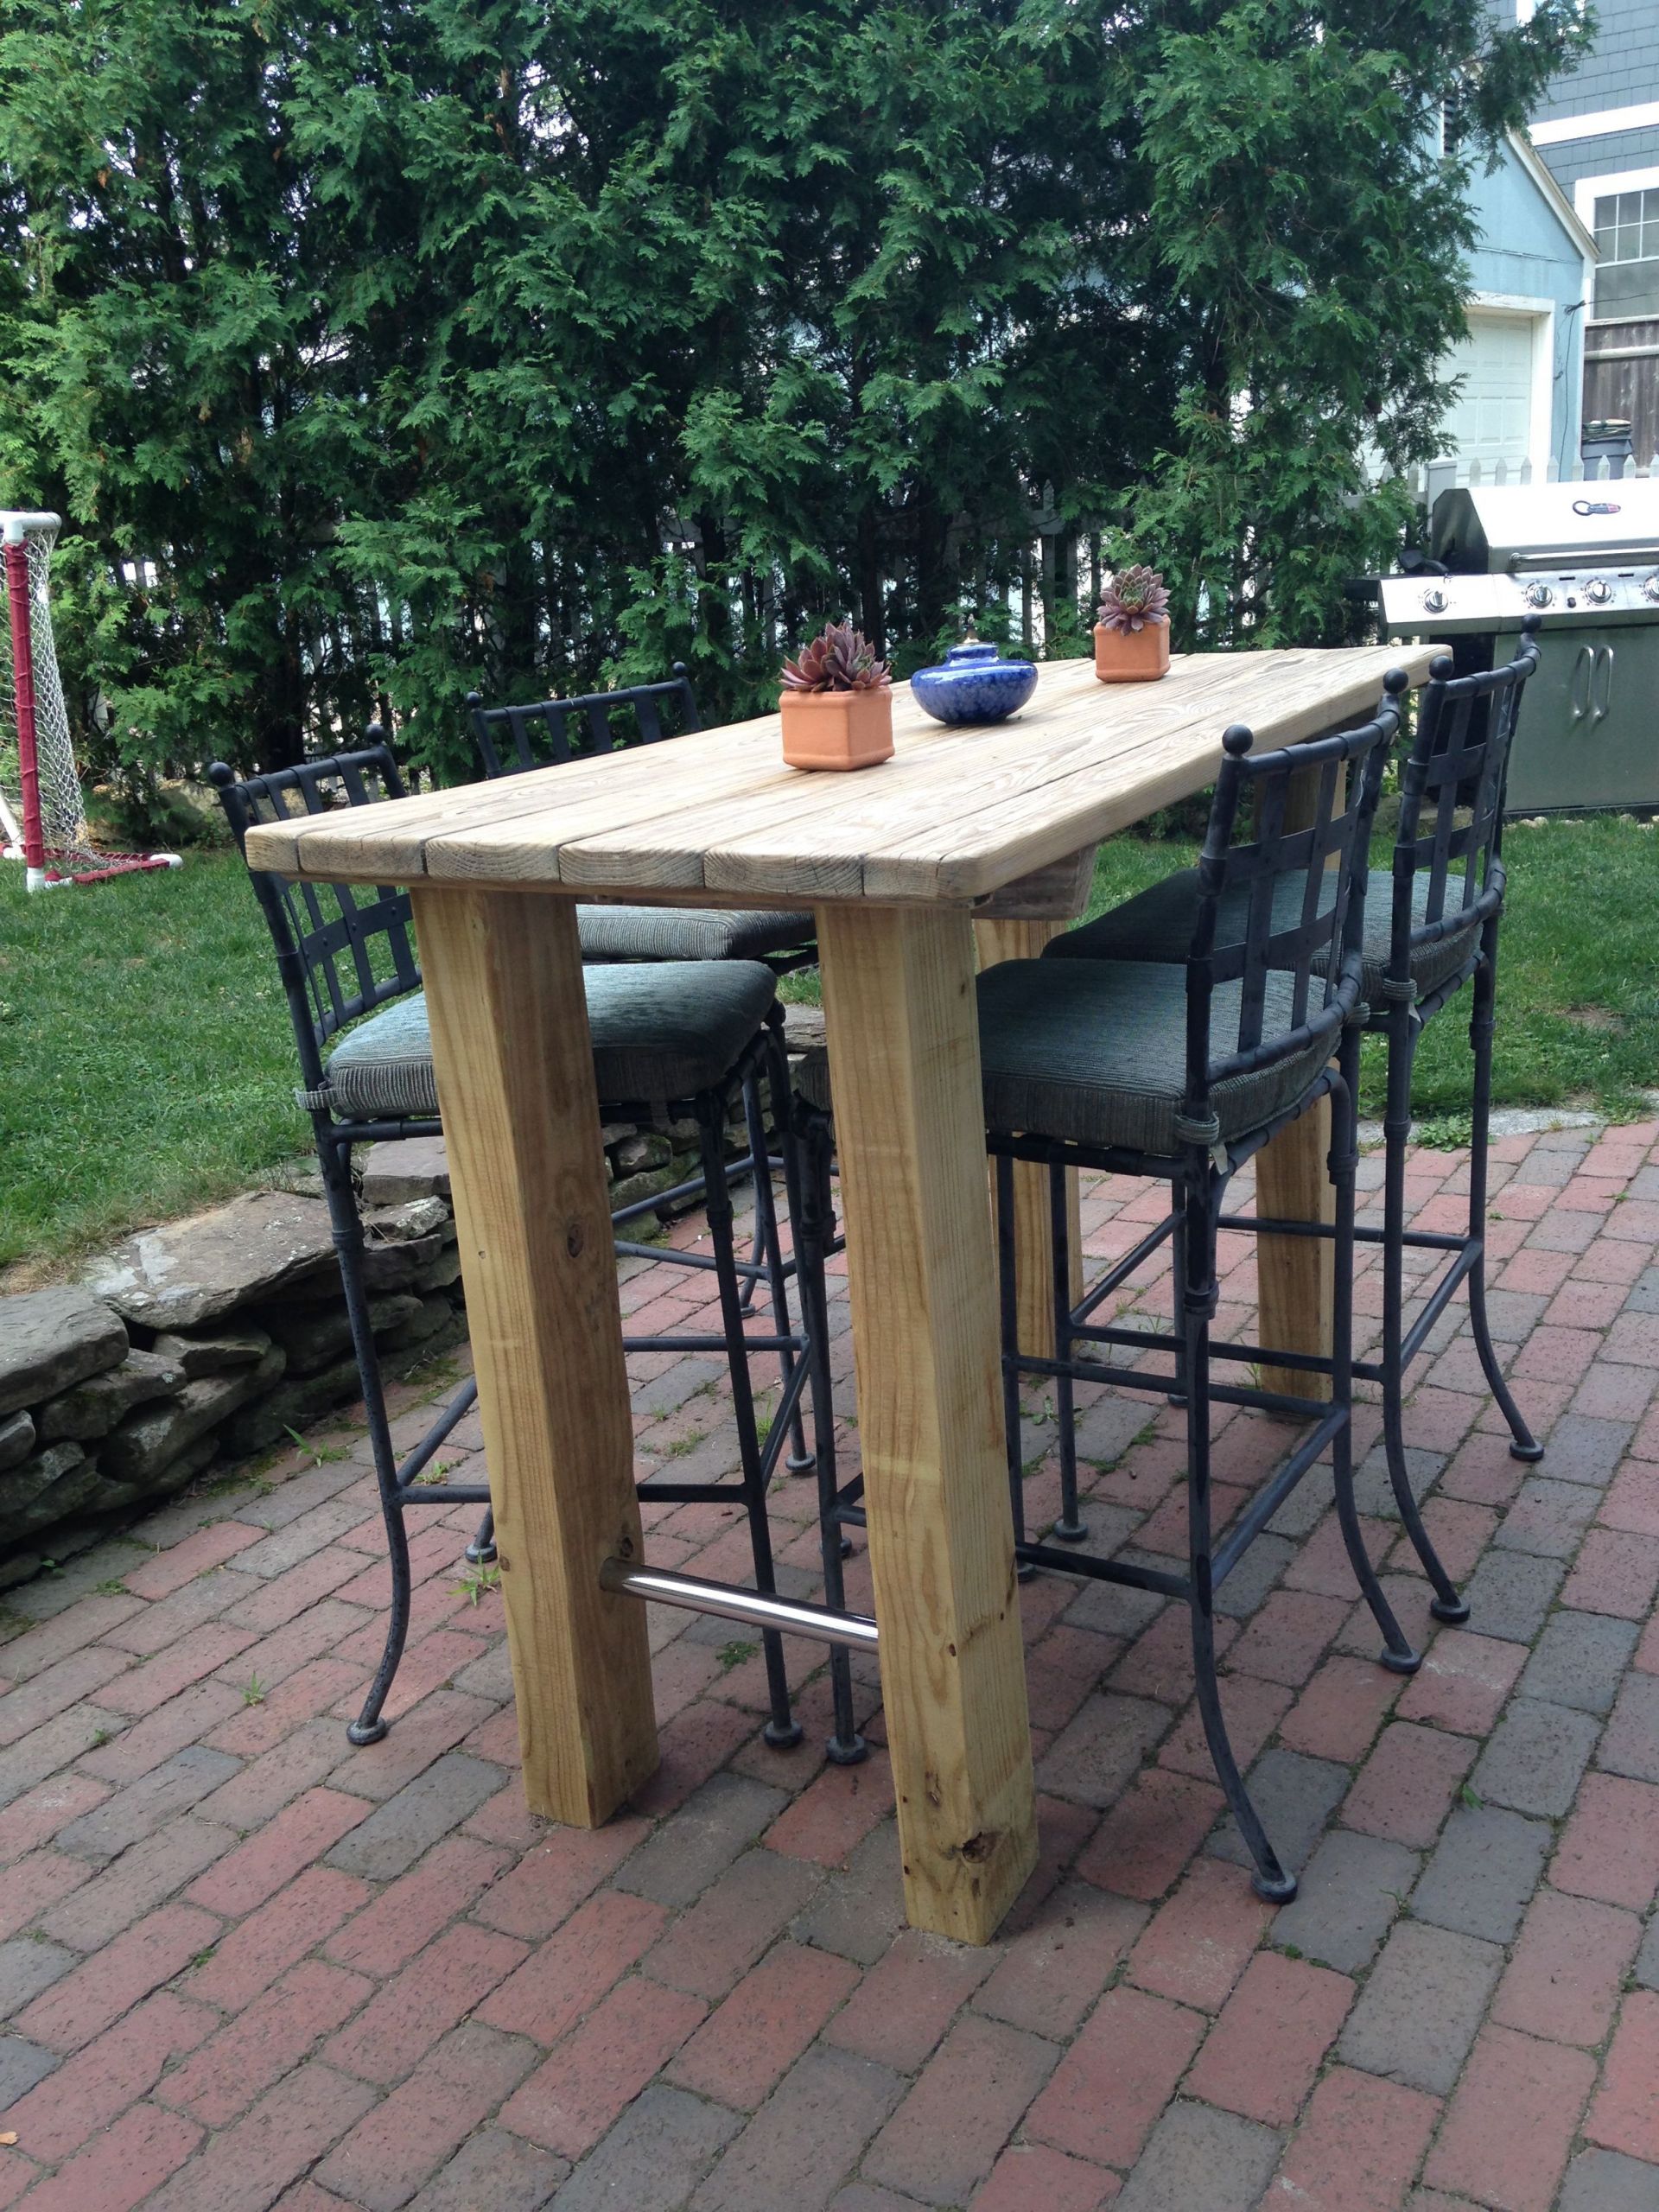 DIY Outdoor Bar Table
 We wanted a bar height table so found an old picnic table